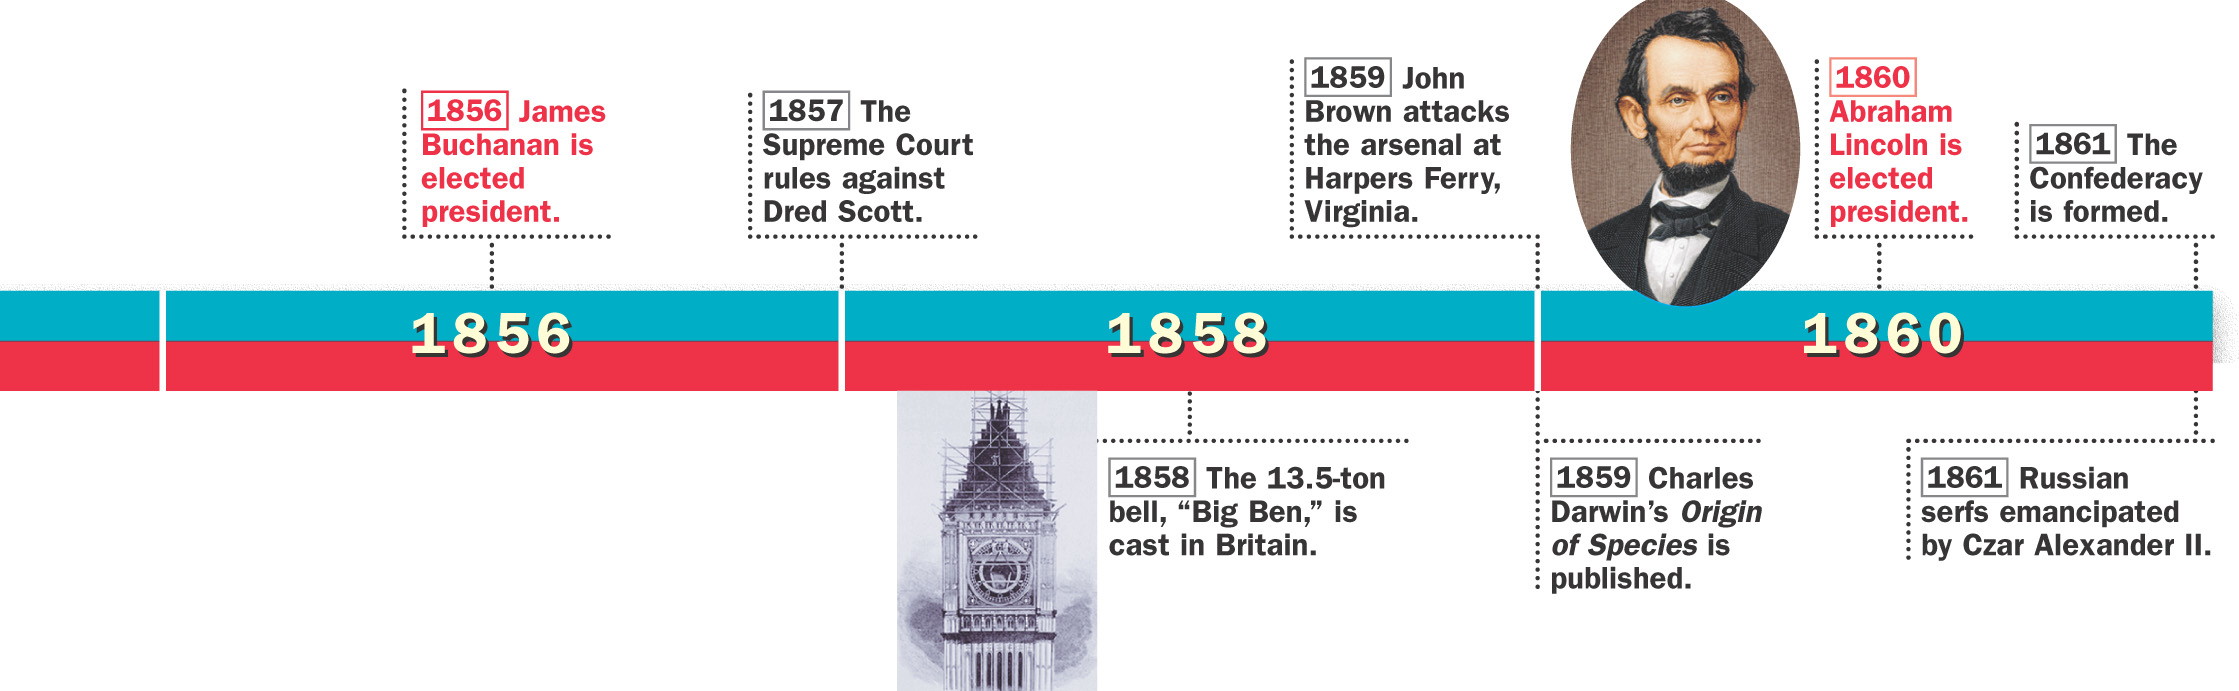 A timeline of historical events from 1850 to 1860 in both the U.S. and the world